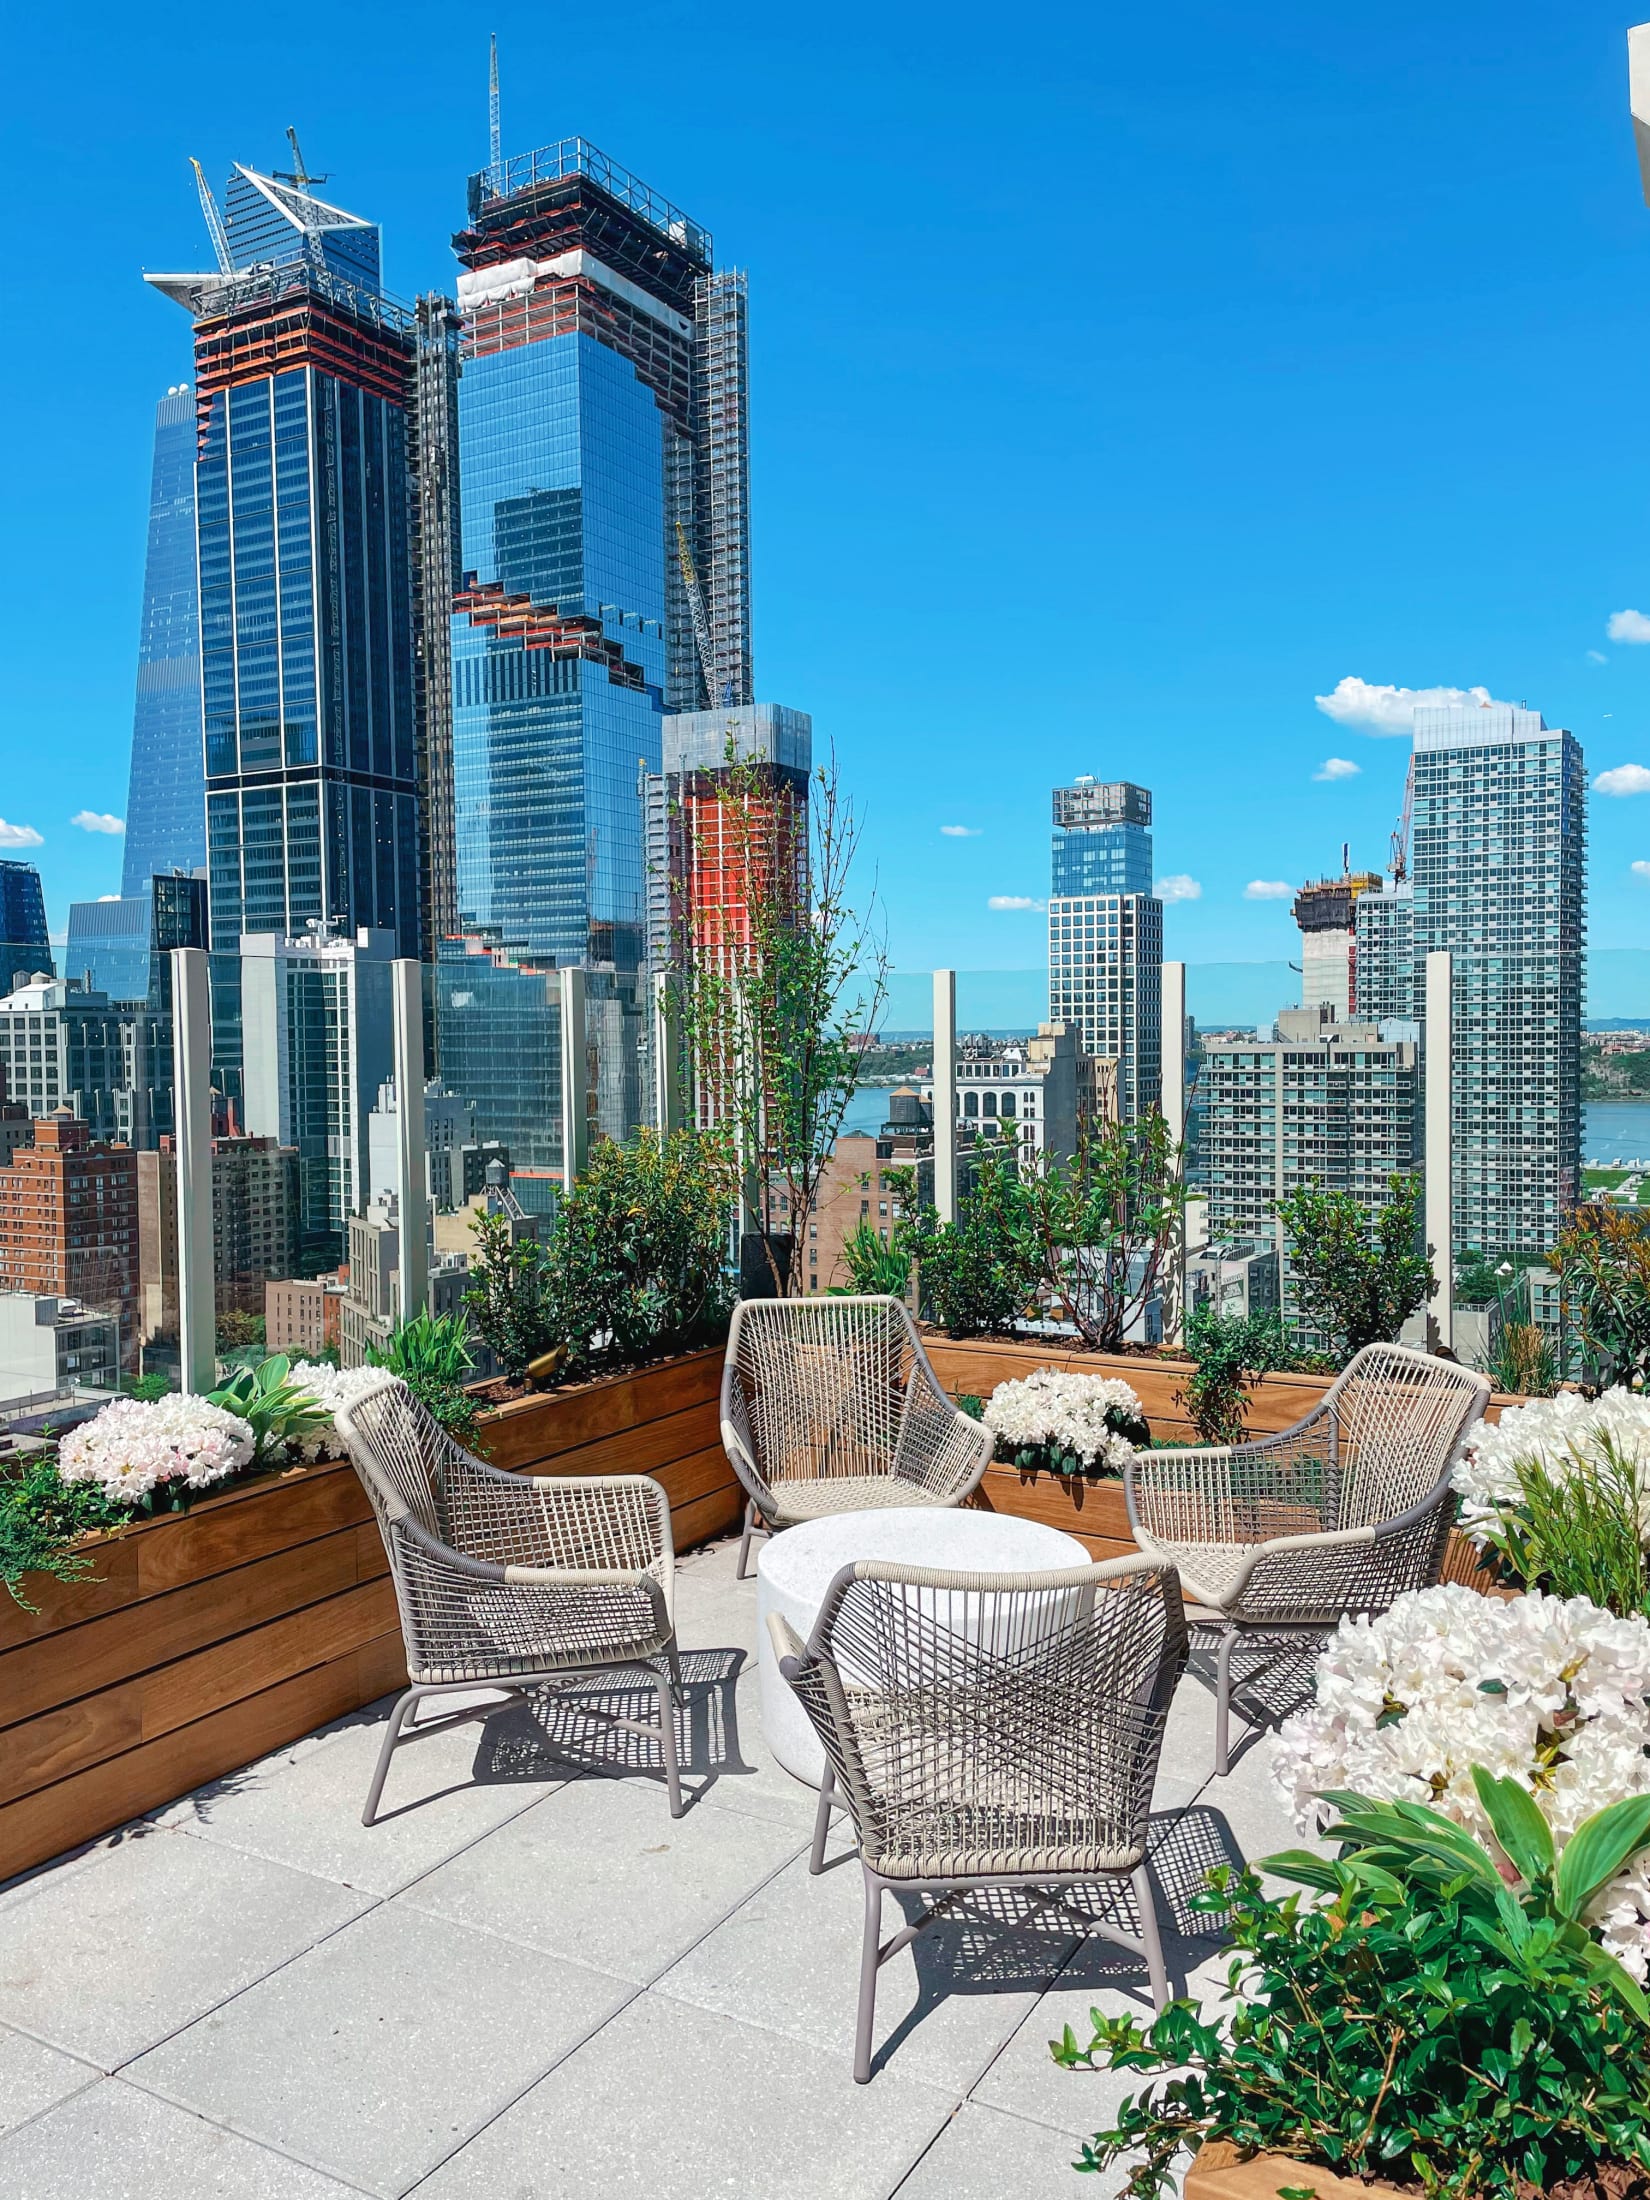 Learn more about The Rooftop at Nearly Ninth